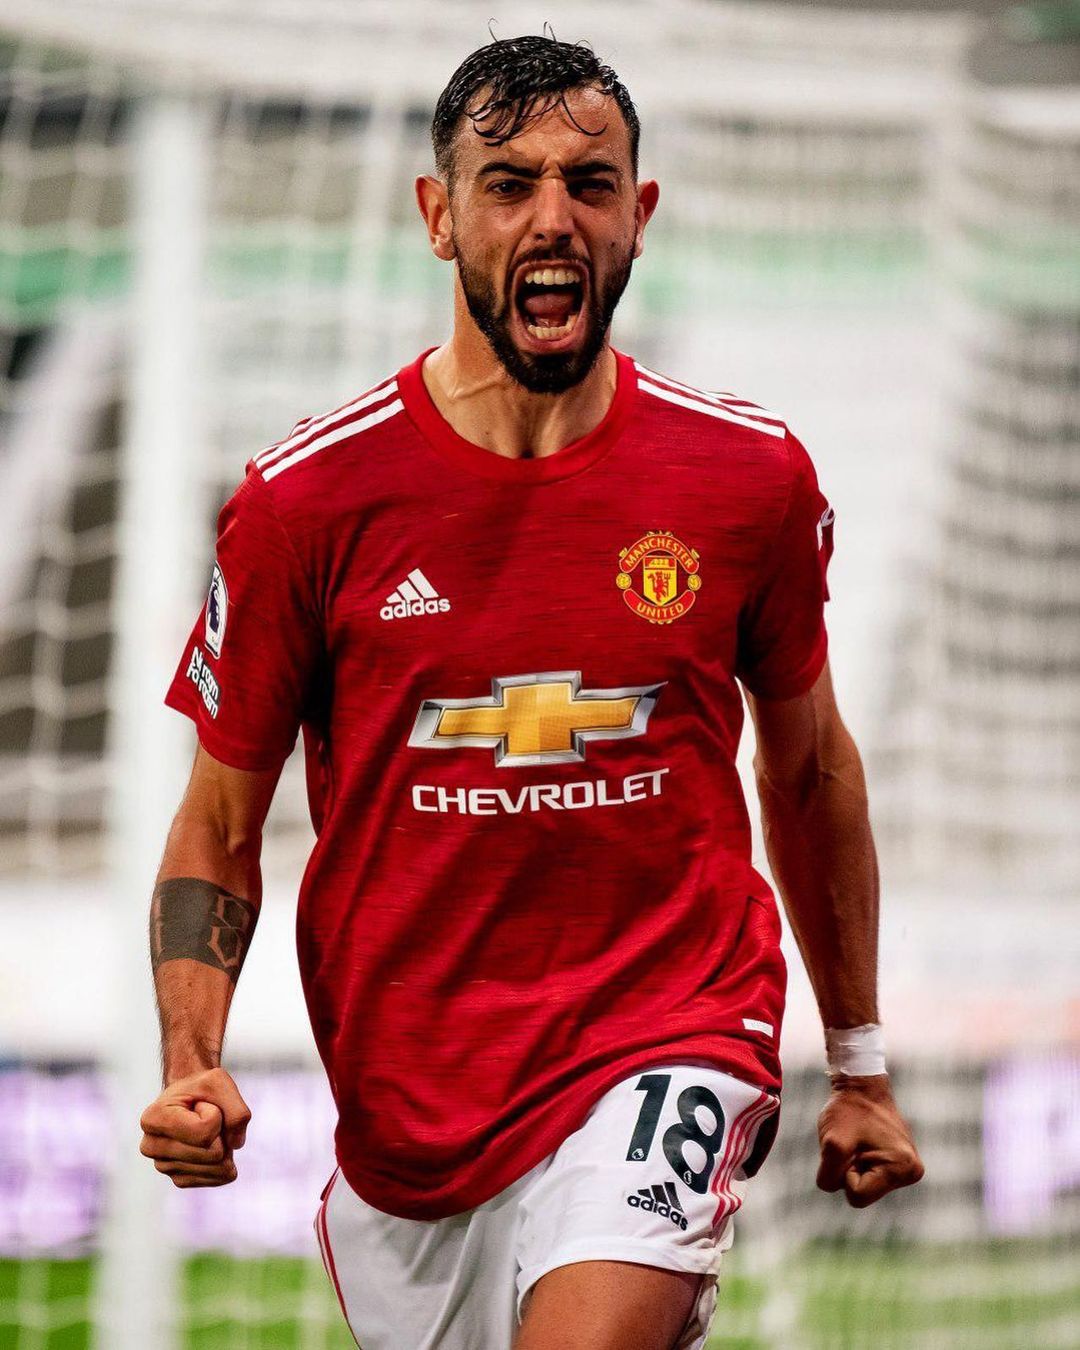 Bruno Fernandes The Manchester United Midfielder Named ‘premier League Player Of The Month For 